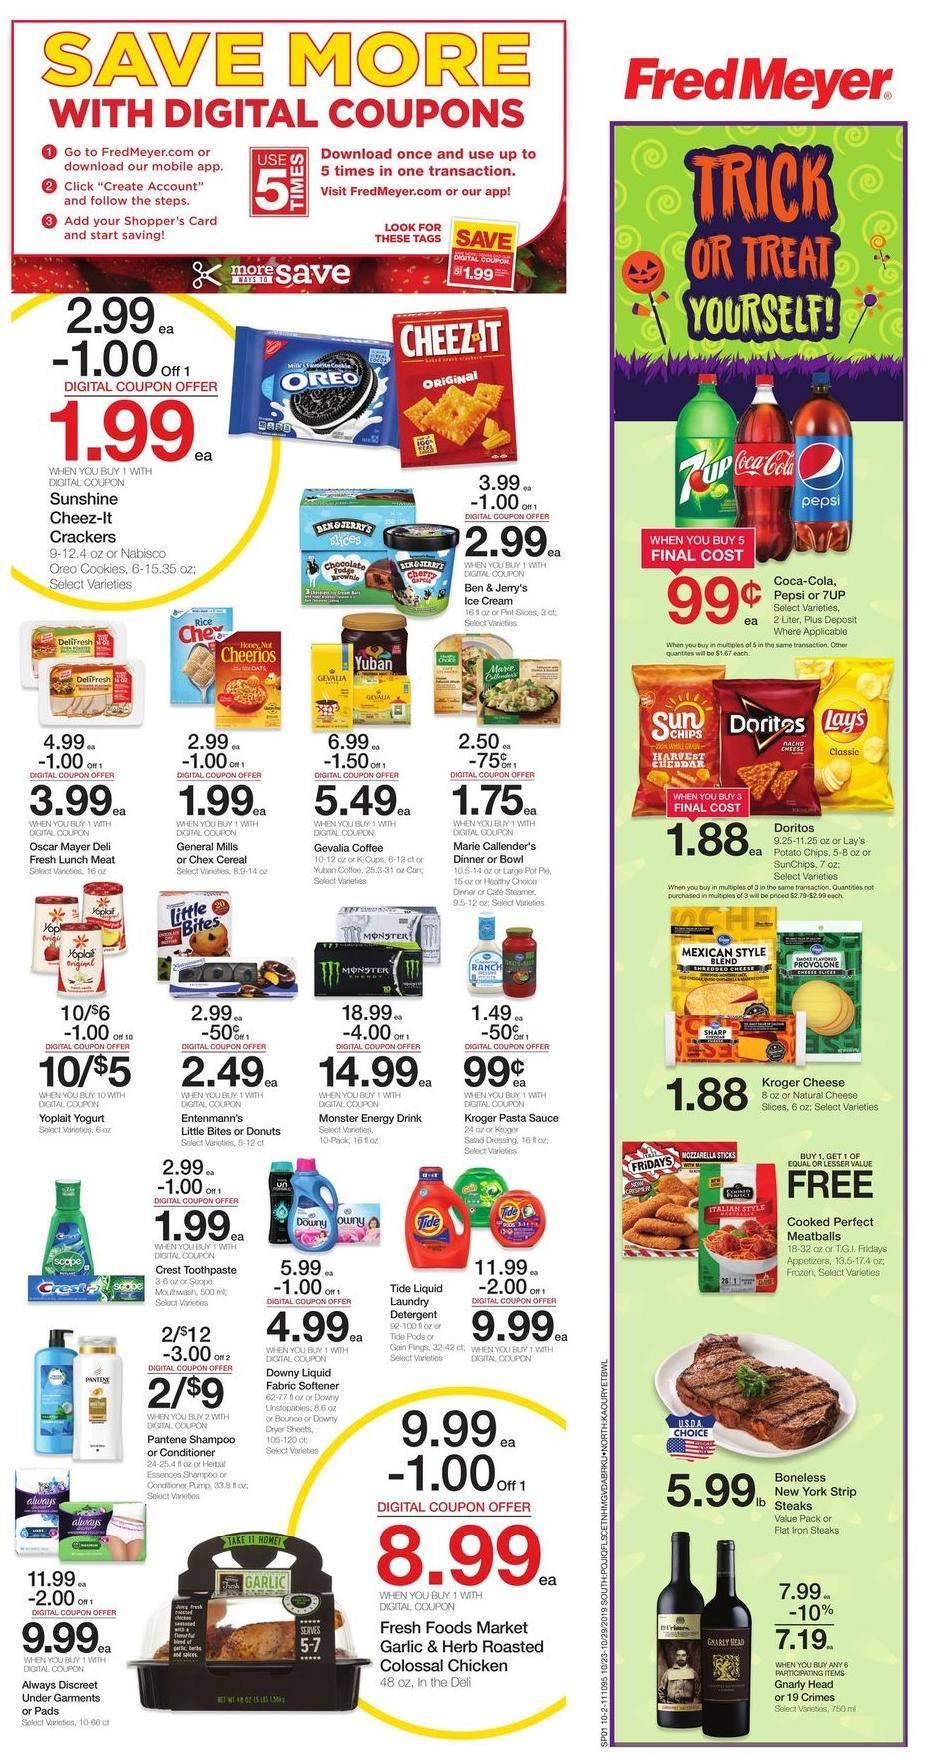 Fred Meyer Weekly Ad from October 23